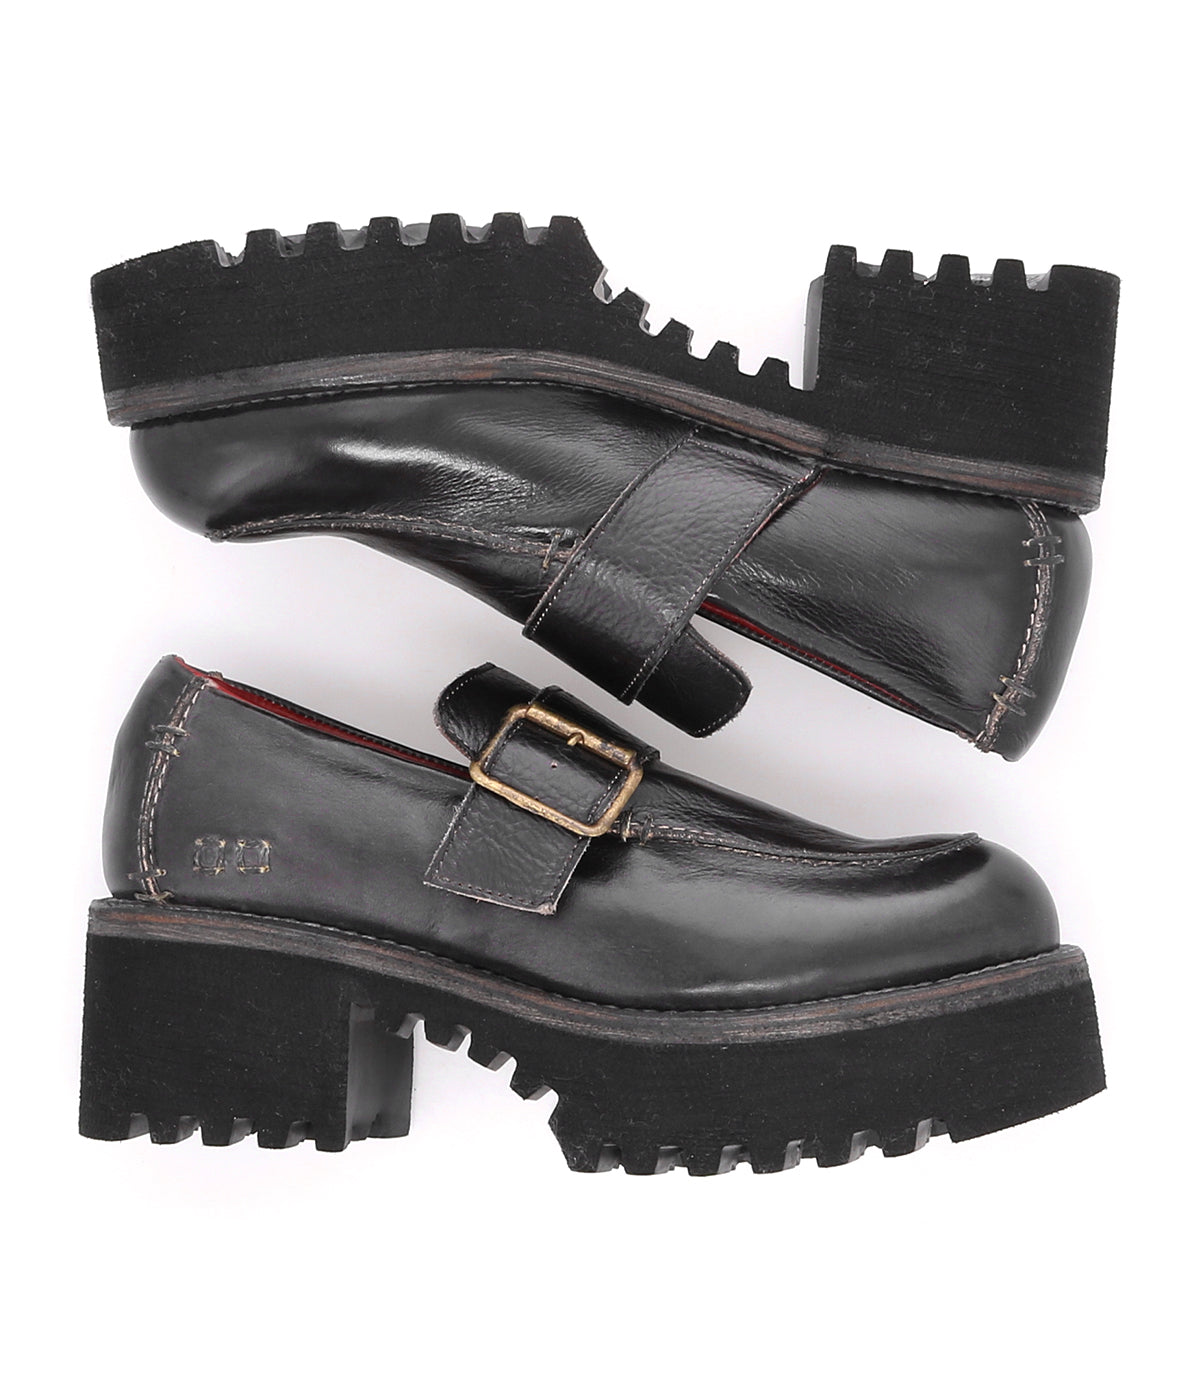 A comfortable pair of Kavi black leather loafers by Bed Stu for fall fashion.